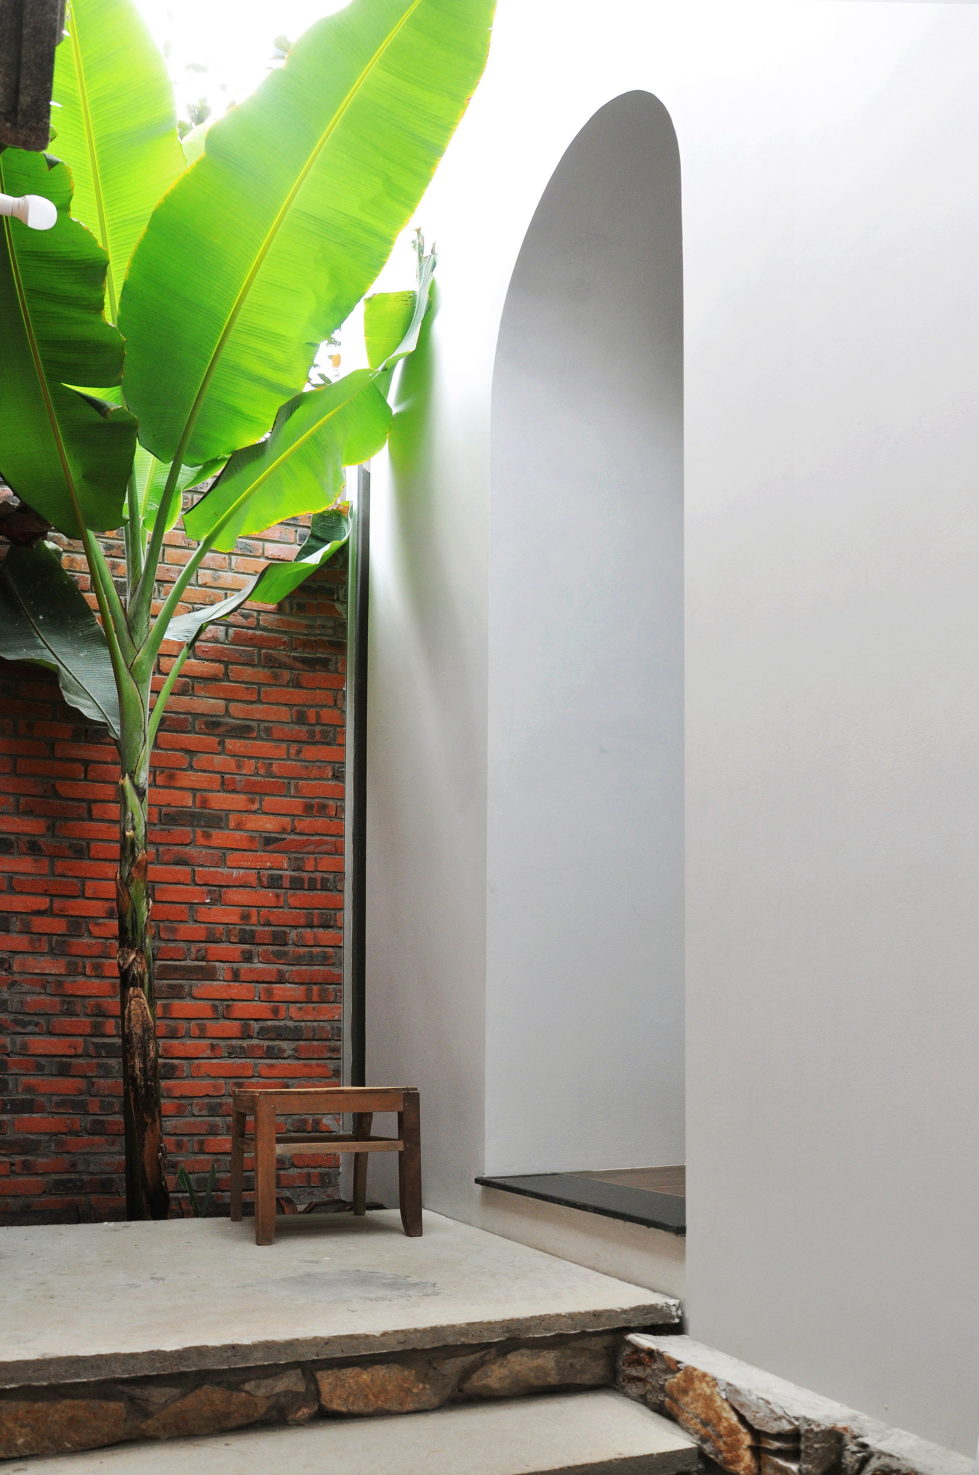 The Shelter Extension Of The Rural Houses Space in Vietnam 7